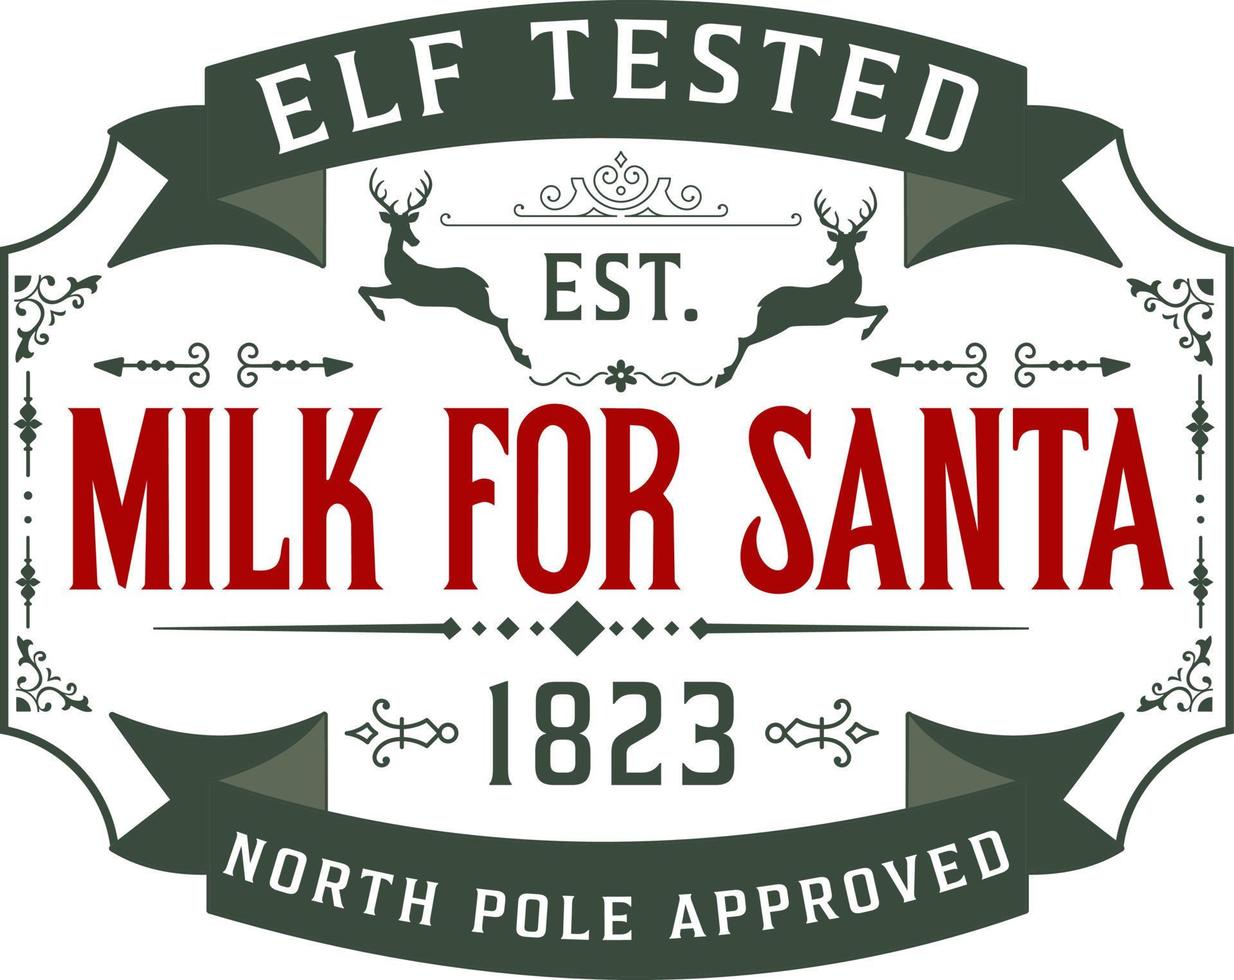 Milk for santa elf tested. Christmas vintage retro typography labels badges vector design isolated on white background. Winter holiday vintage ornaments, quotes, signs, tag, postal label,  postmark